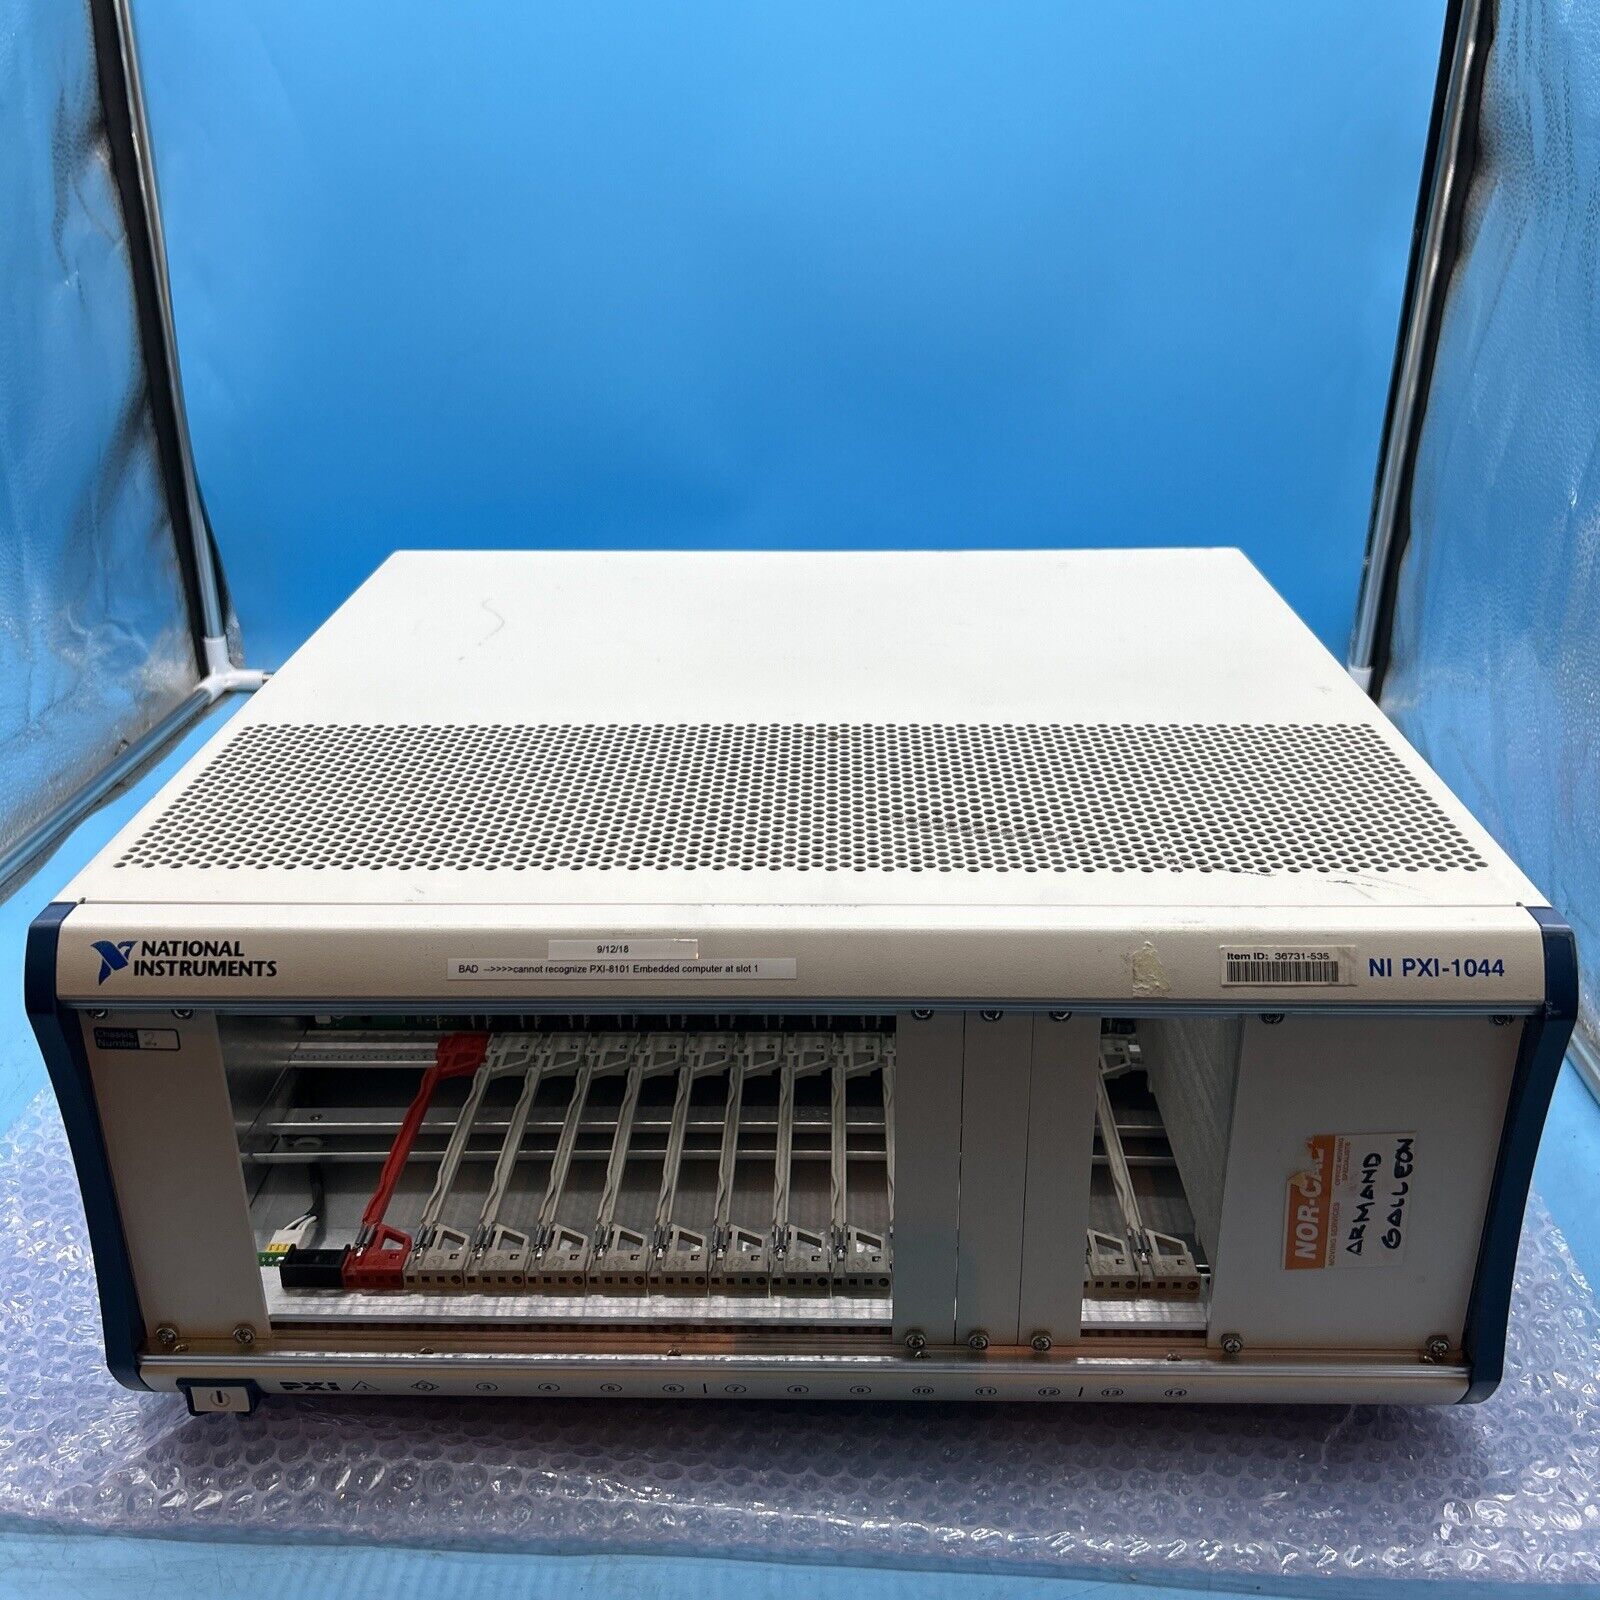 National Instruments NI PXI-1044 Chassis 14-Slot PXI Mainframe 189105E-01 Rev 01